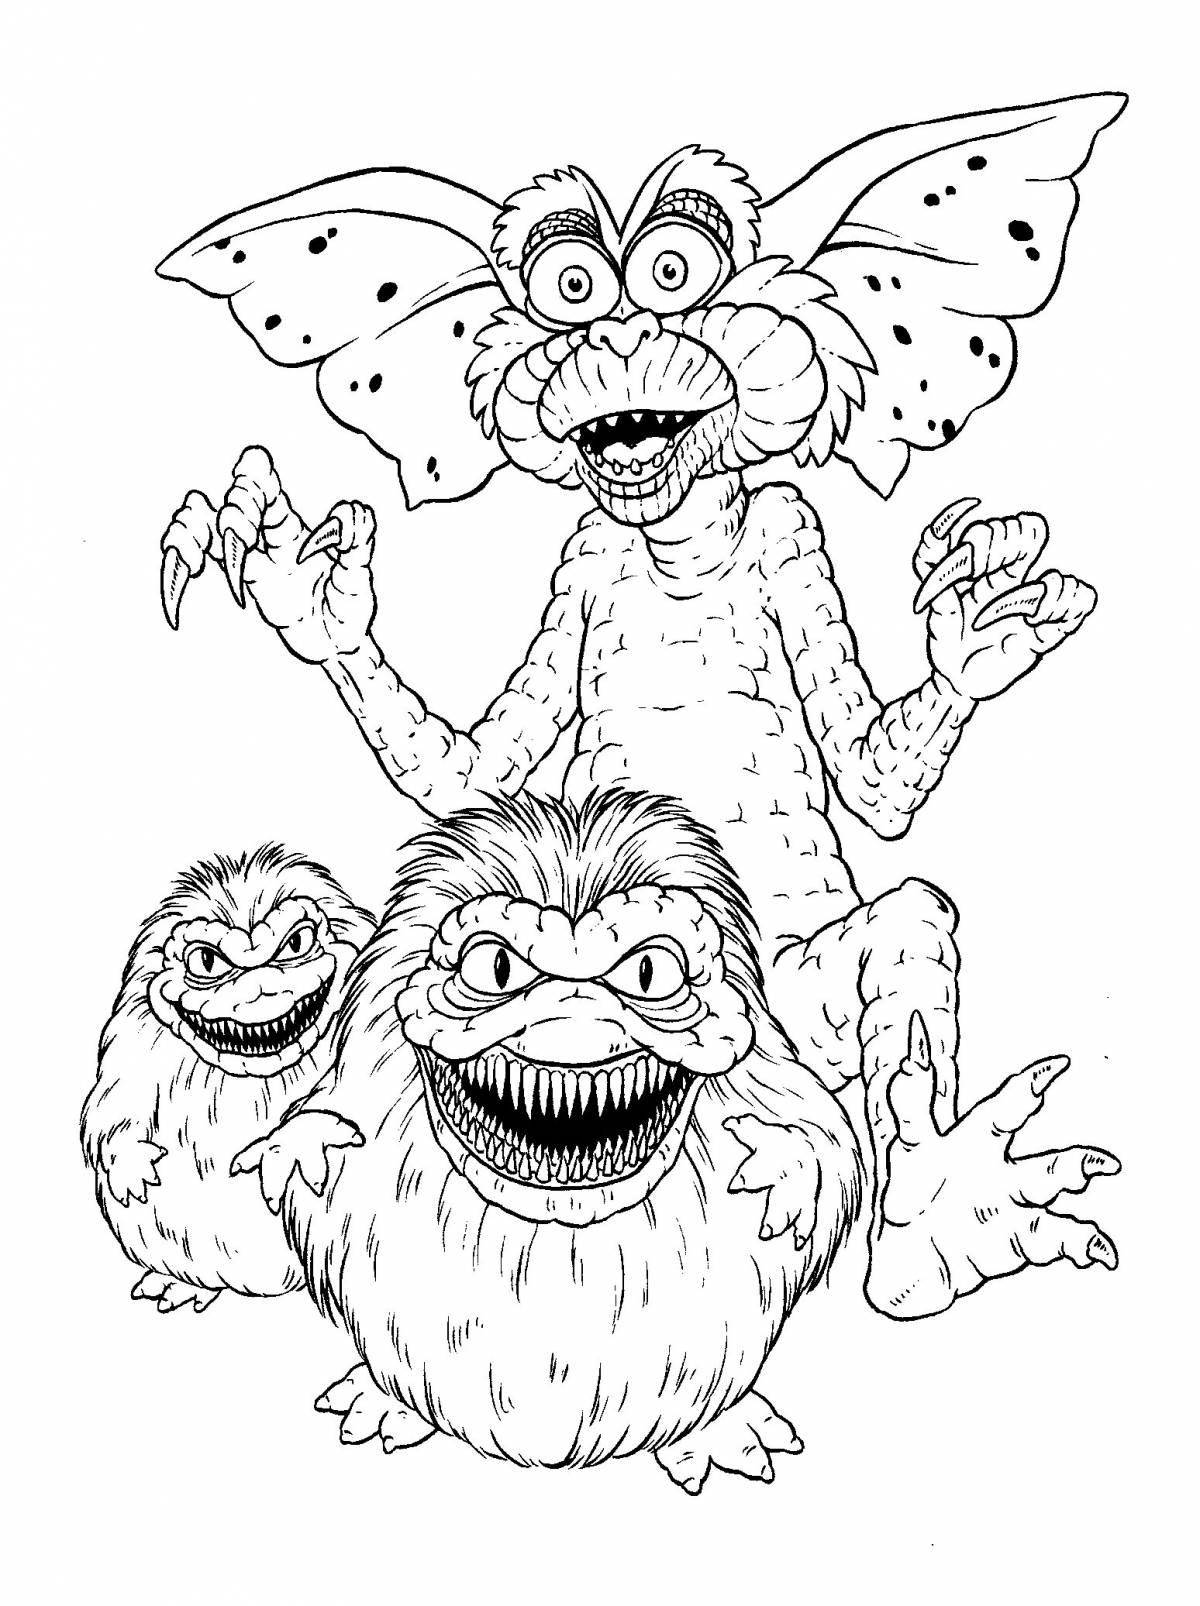 Frightening scary children's coloring book